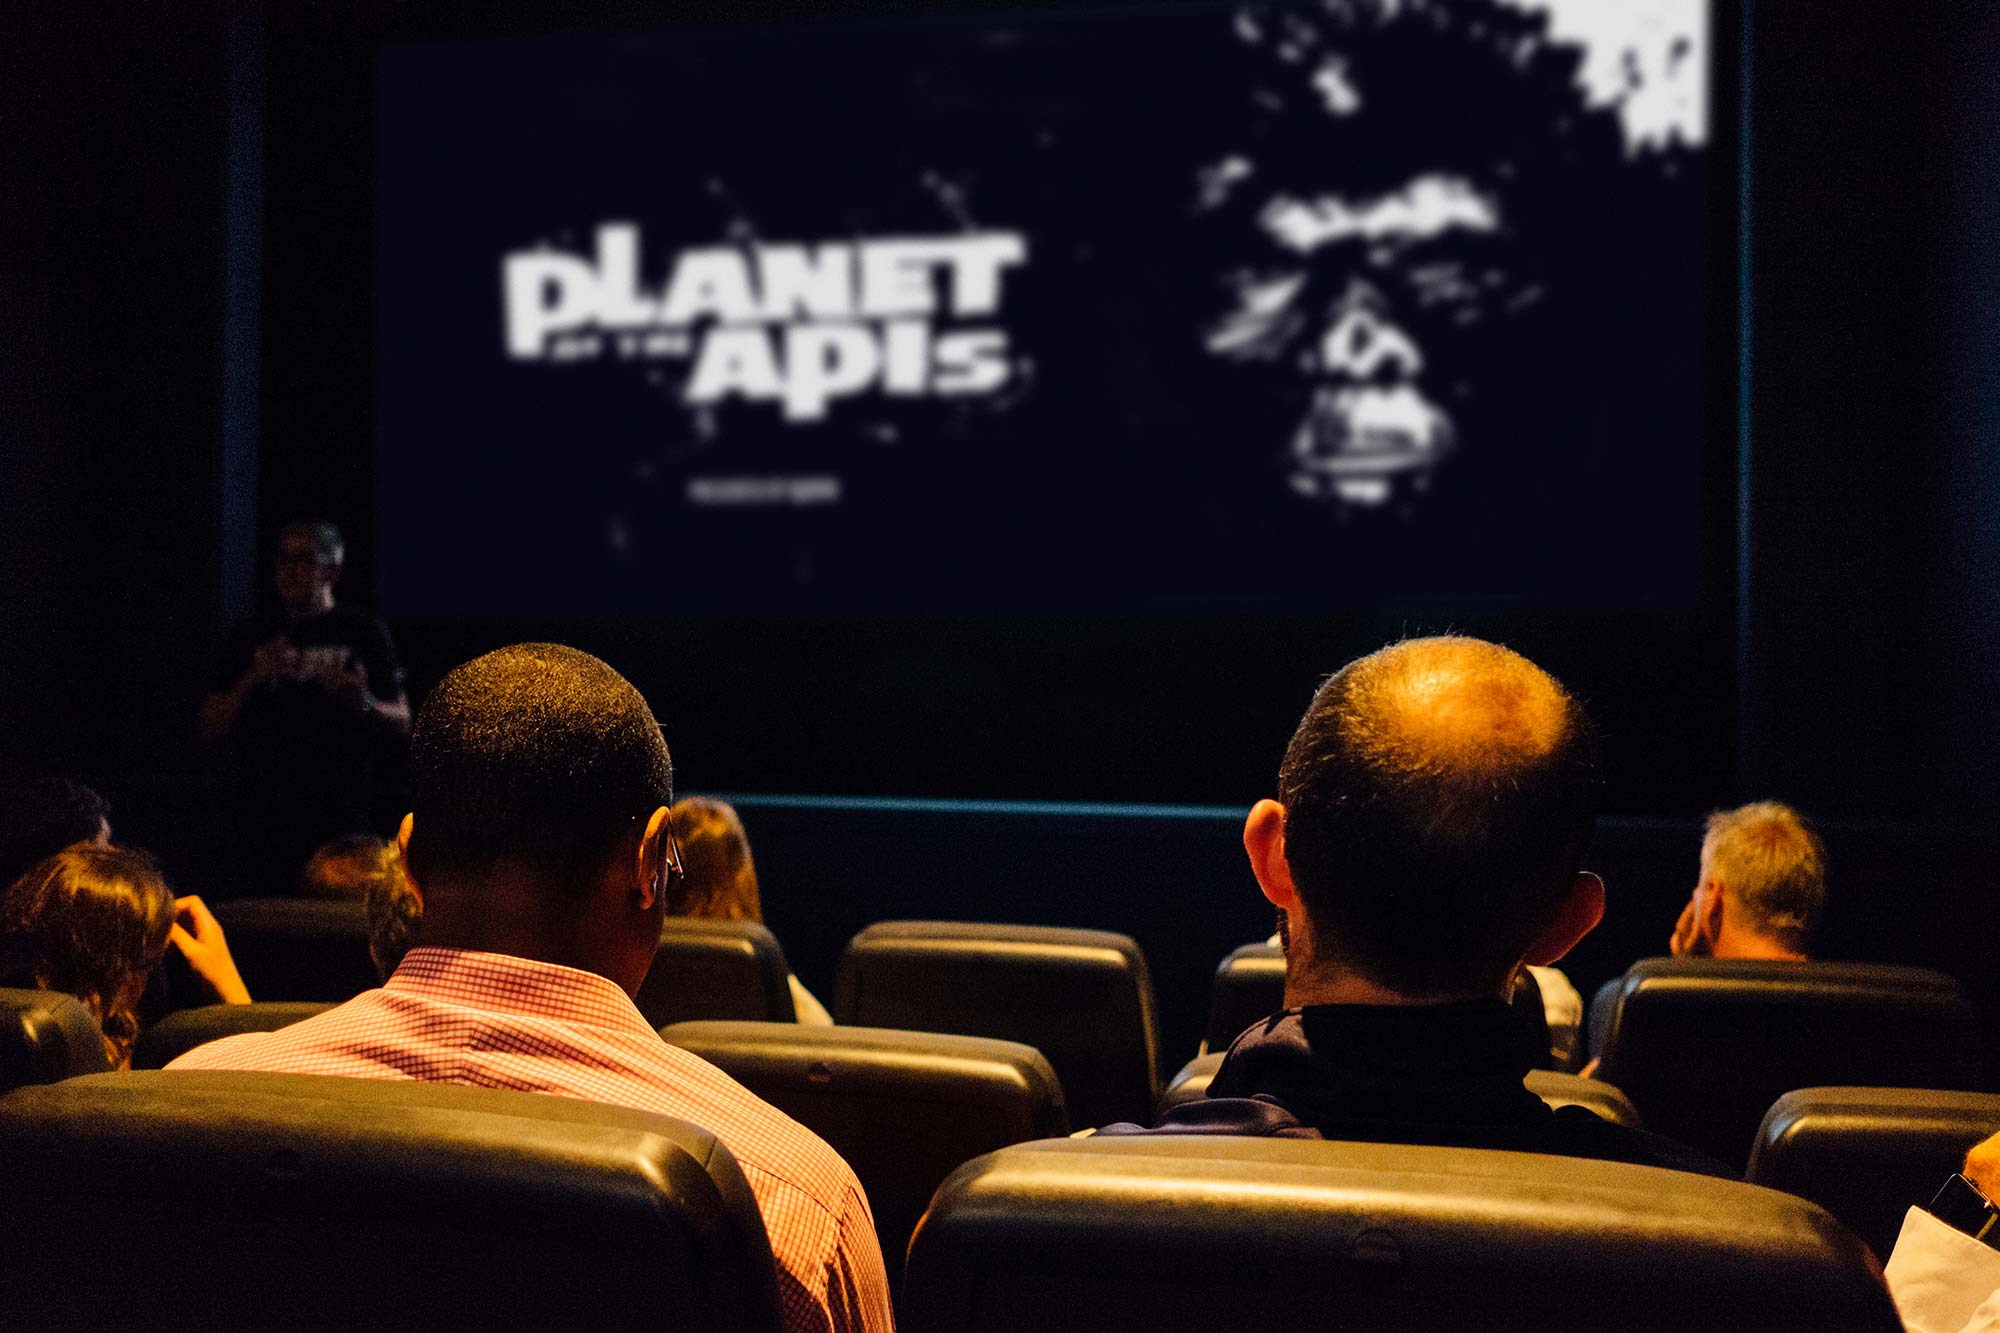 Planet of the Apes Cinema